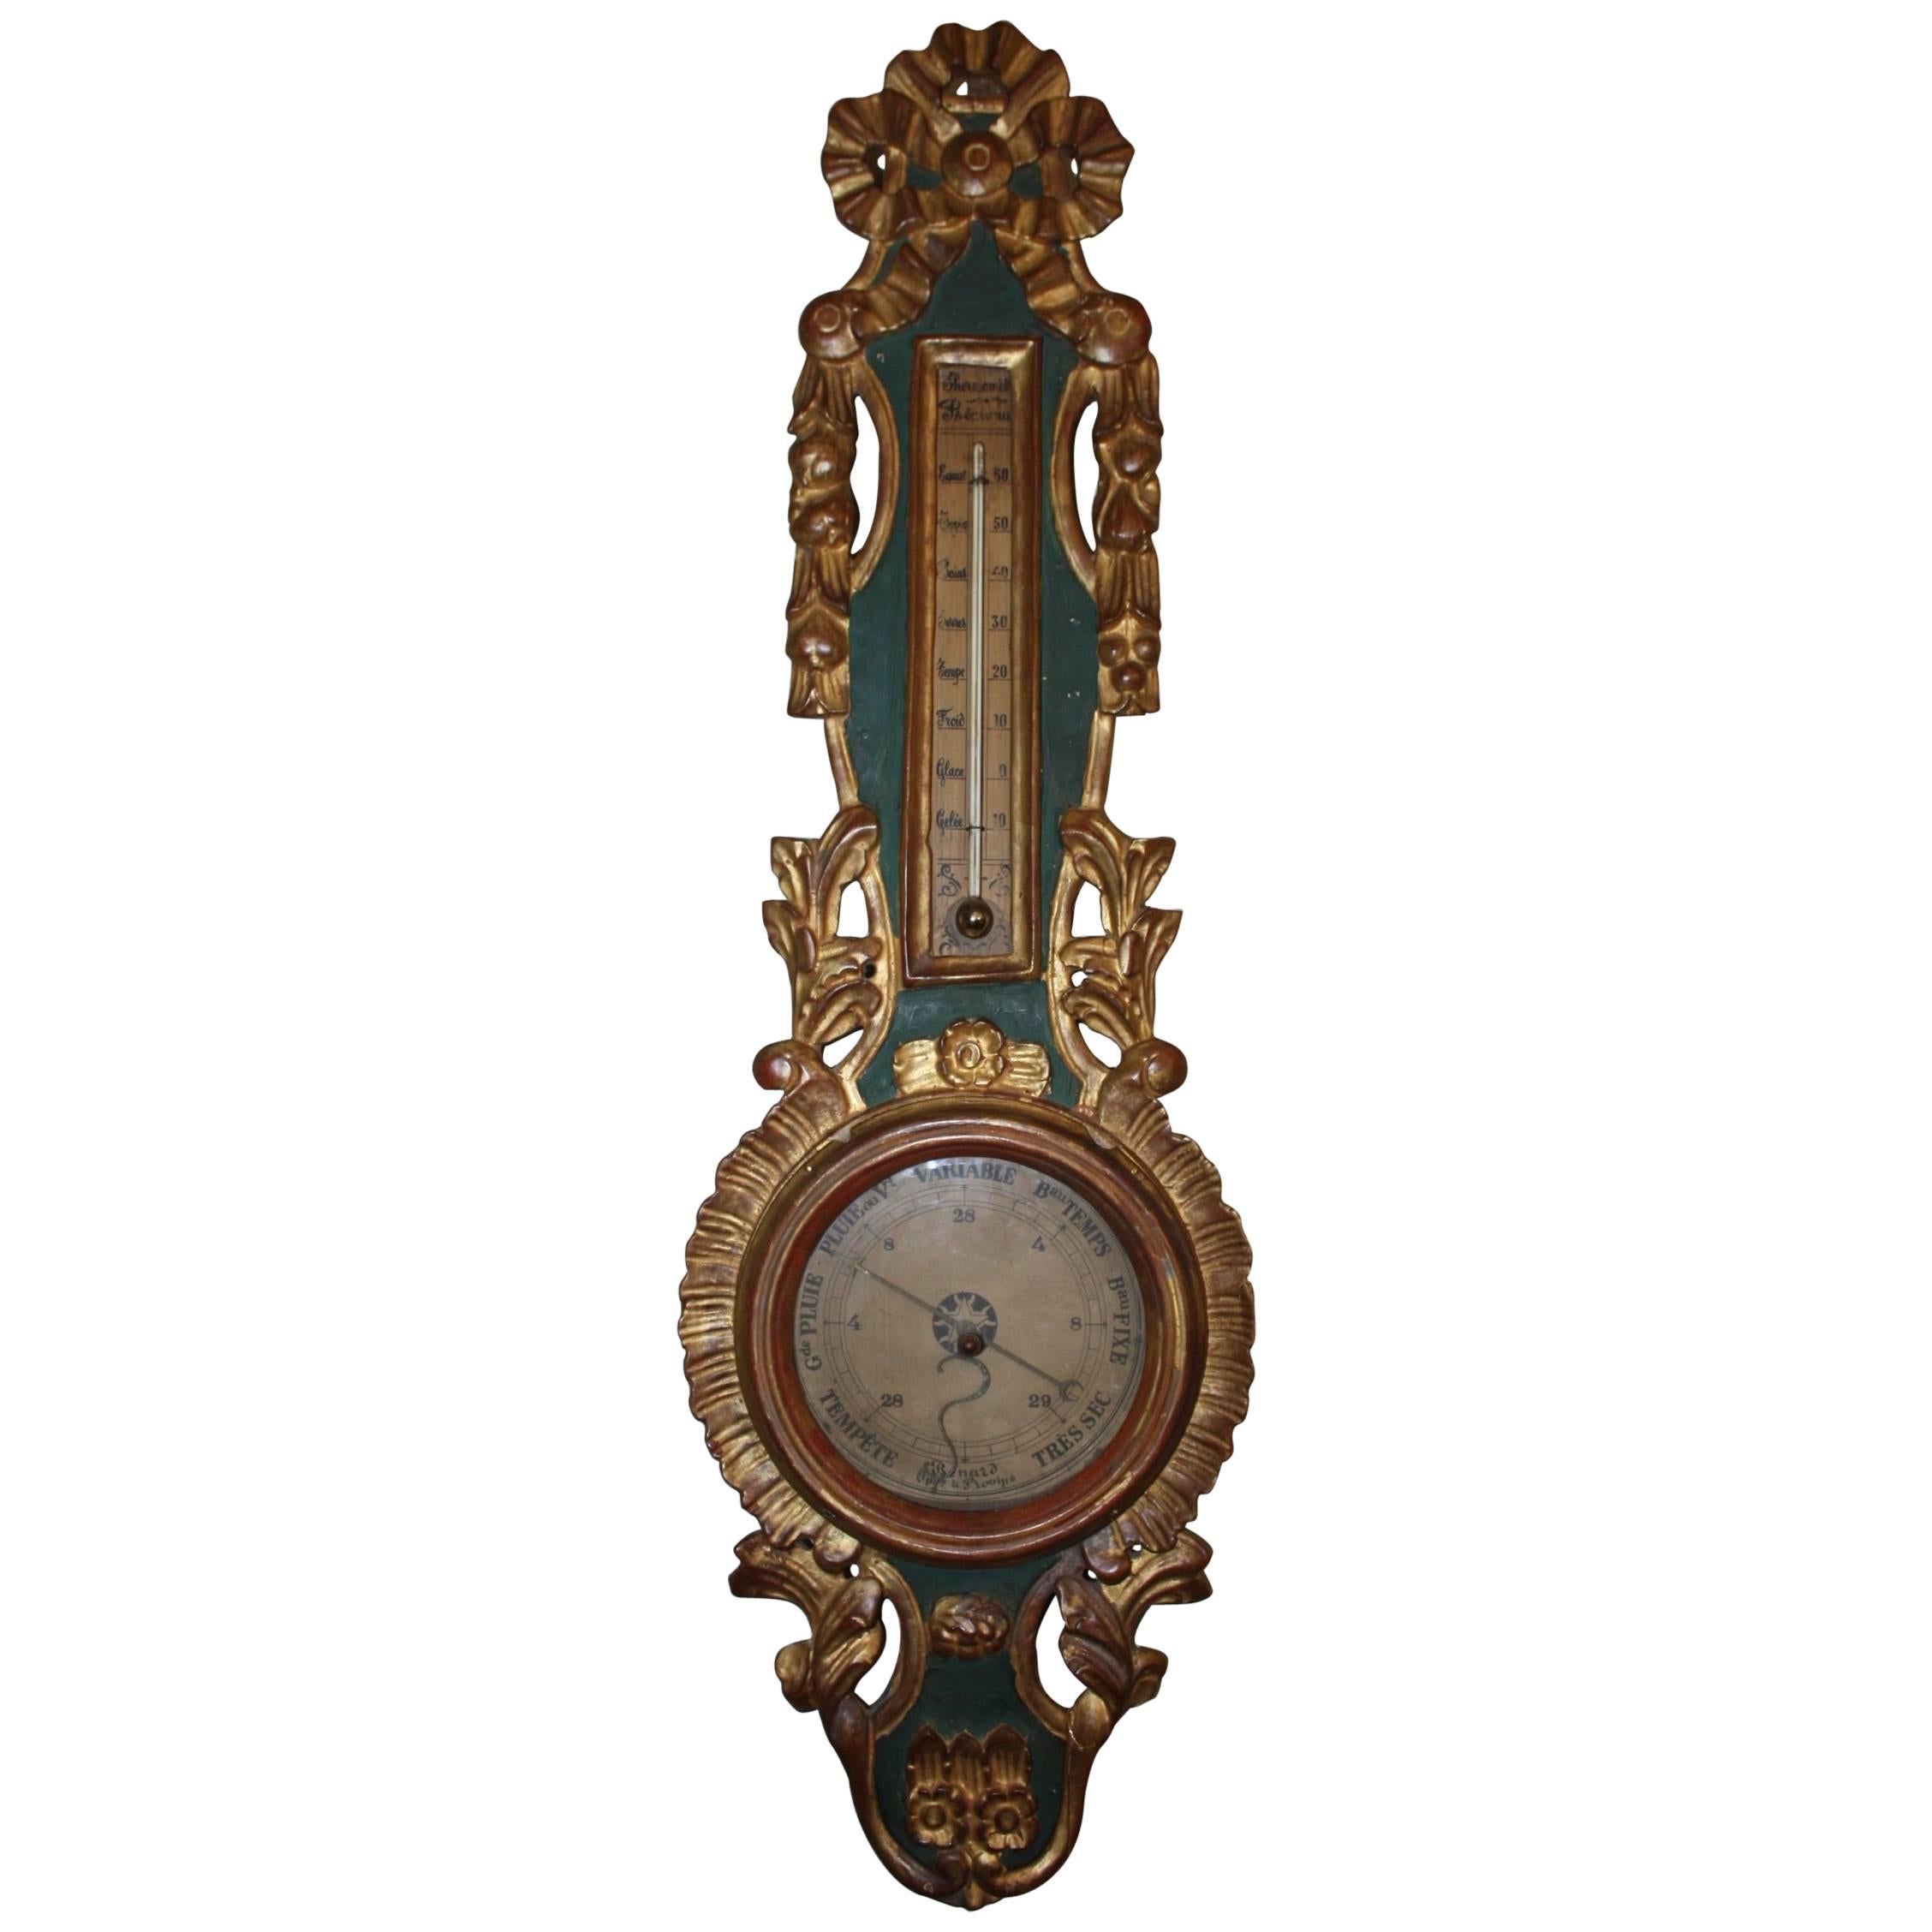 French Louis XVI Style Gilded and Painted Wood Barometer